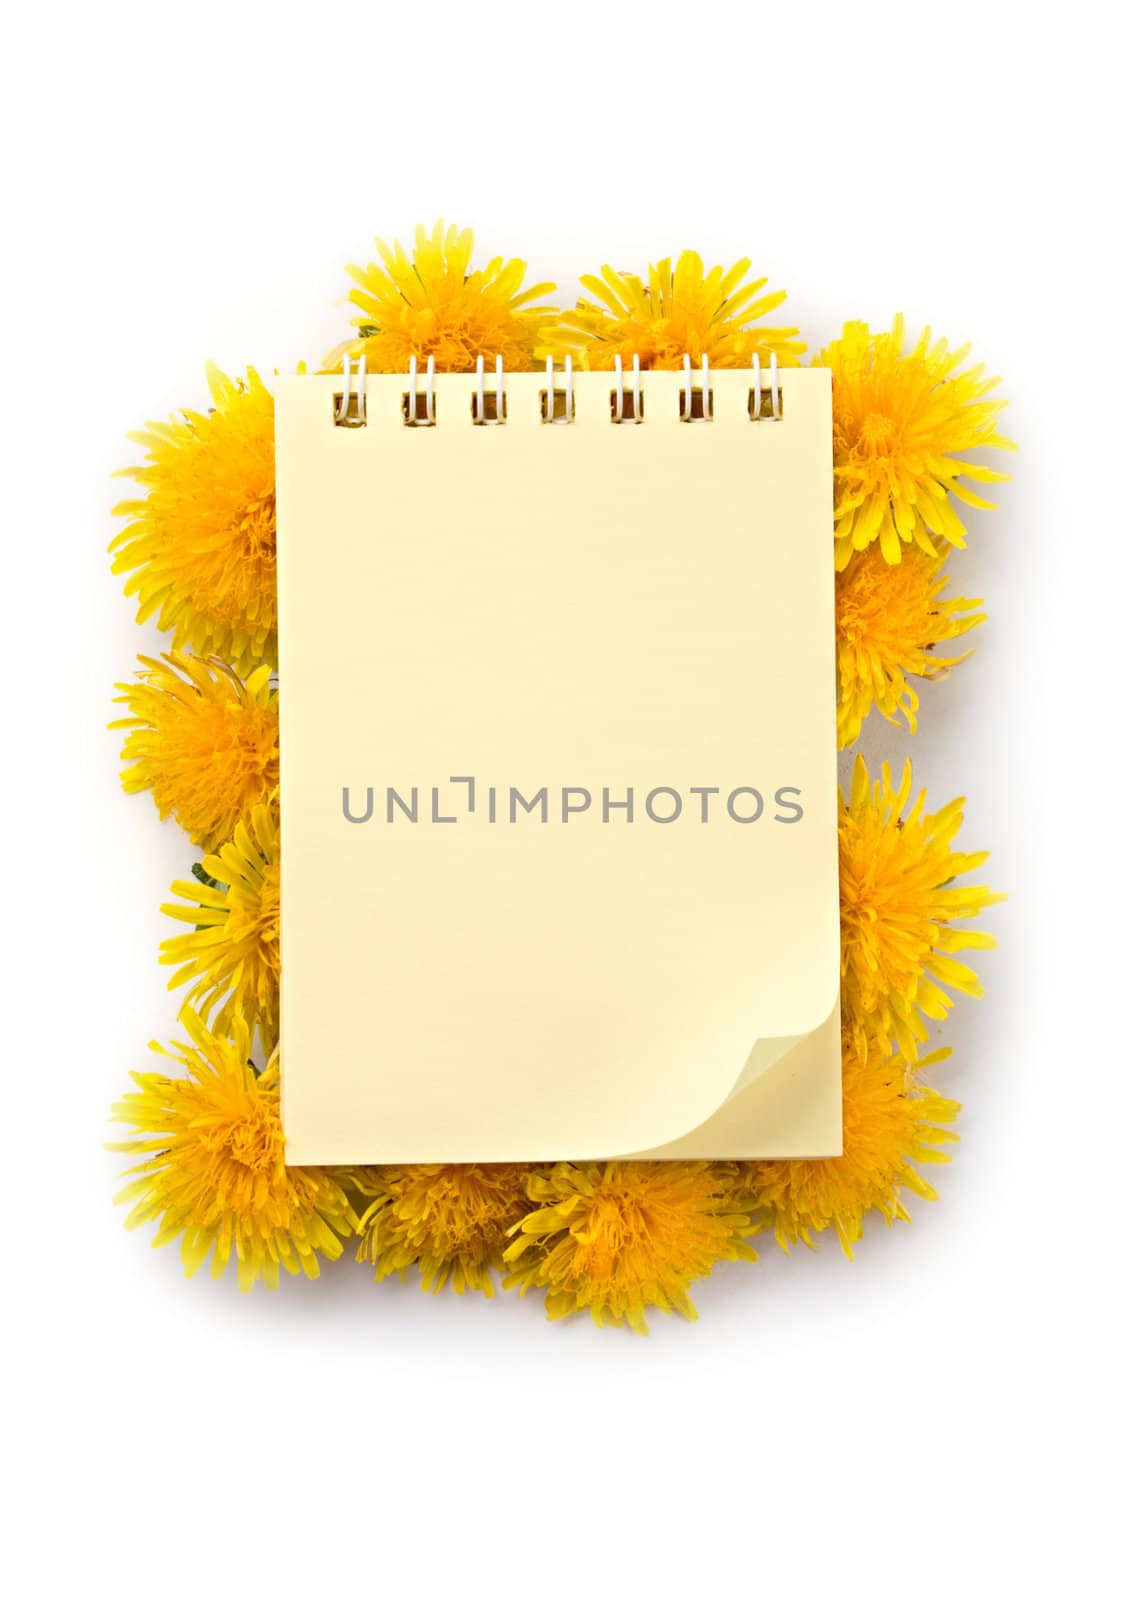 Notepad and flowers isolated on the white background by Garsya